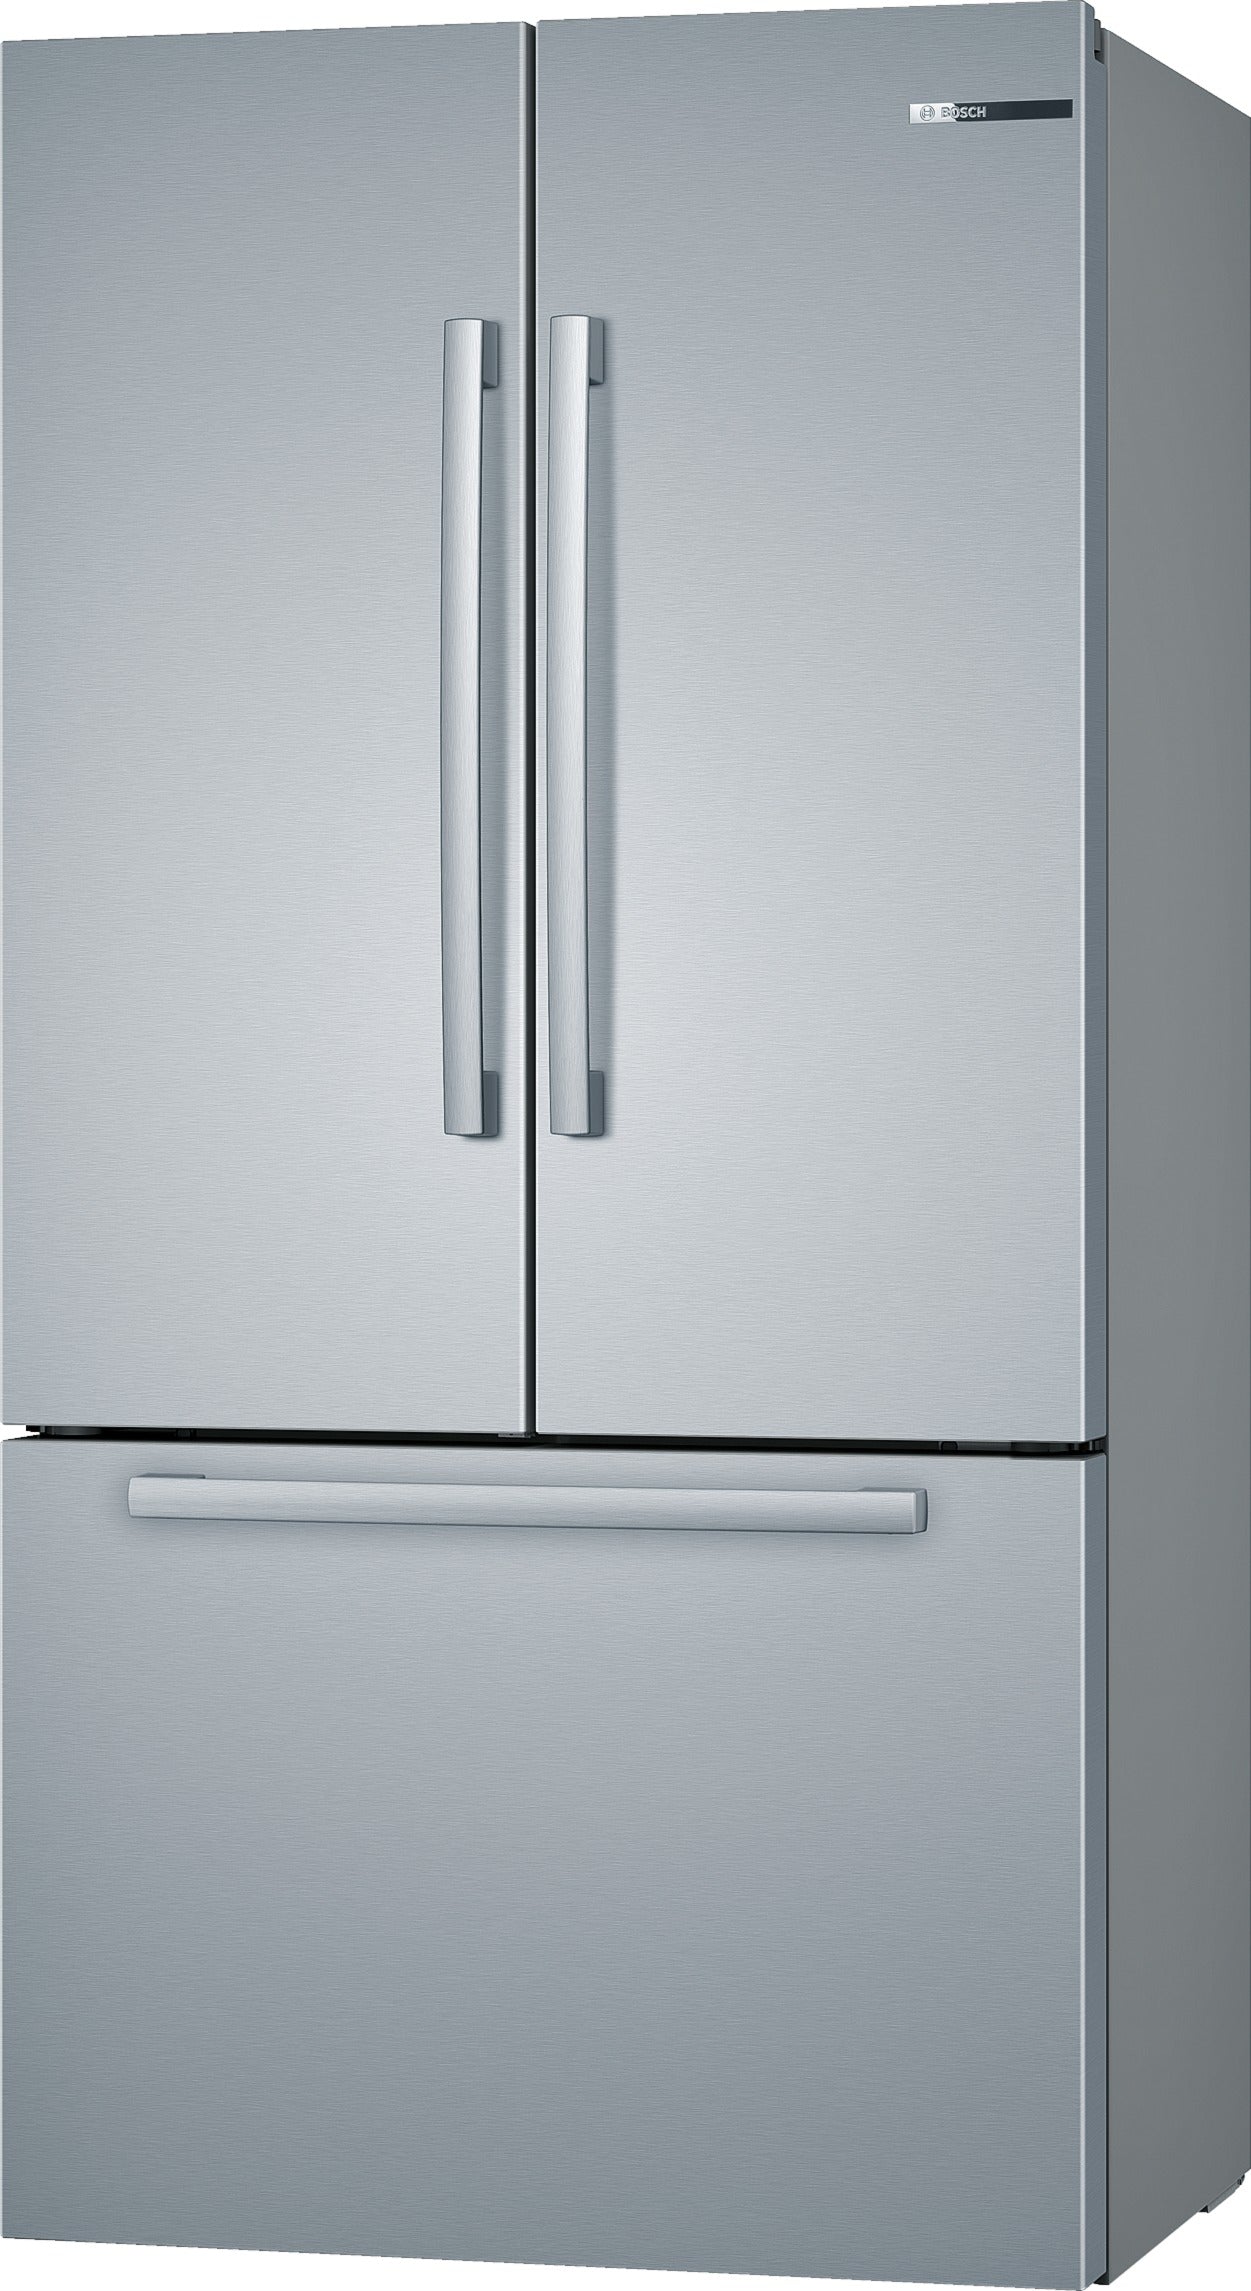 Bosch 800 Series Stainless Steel Counter-Depth French Door Refrigerator - B36CT80SNS